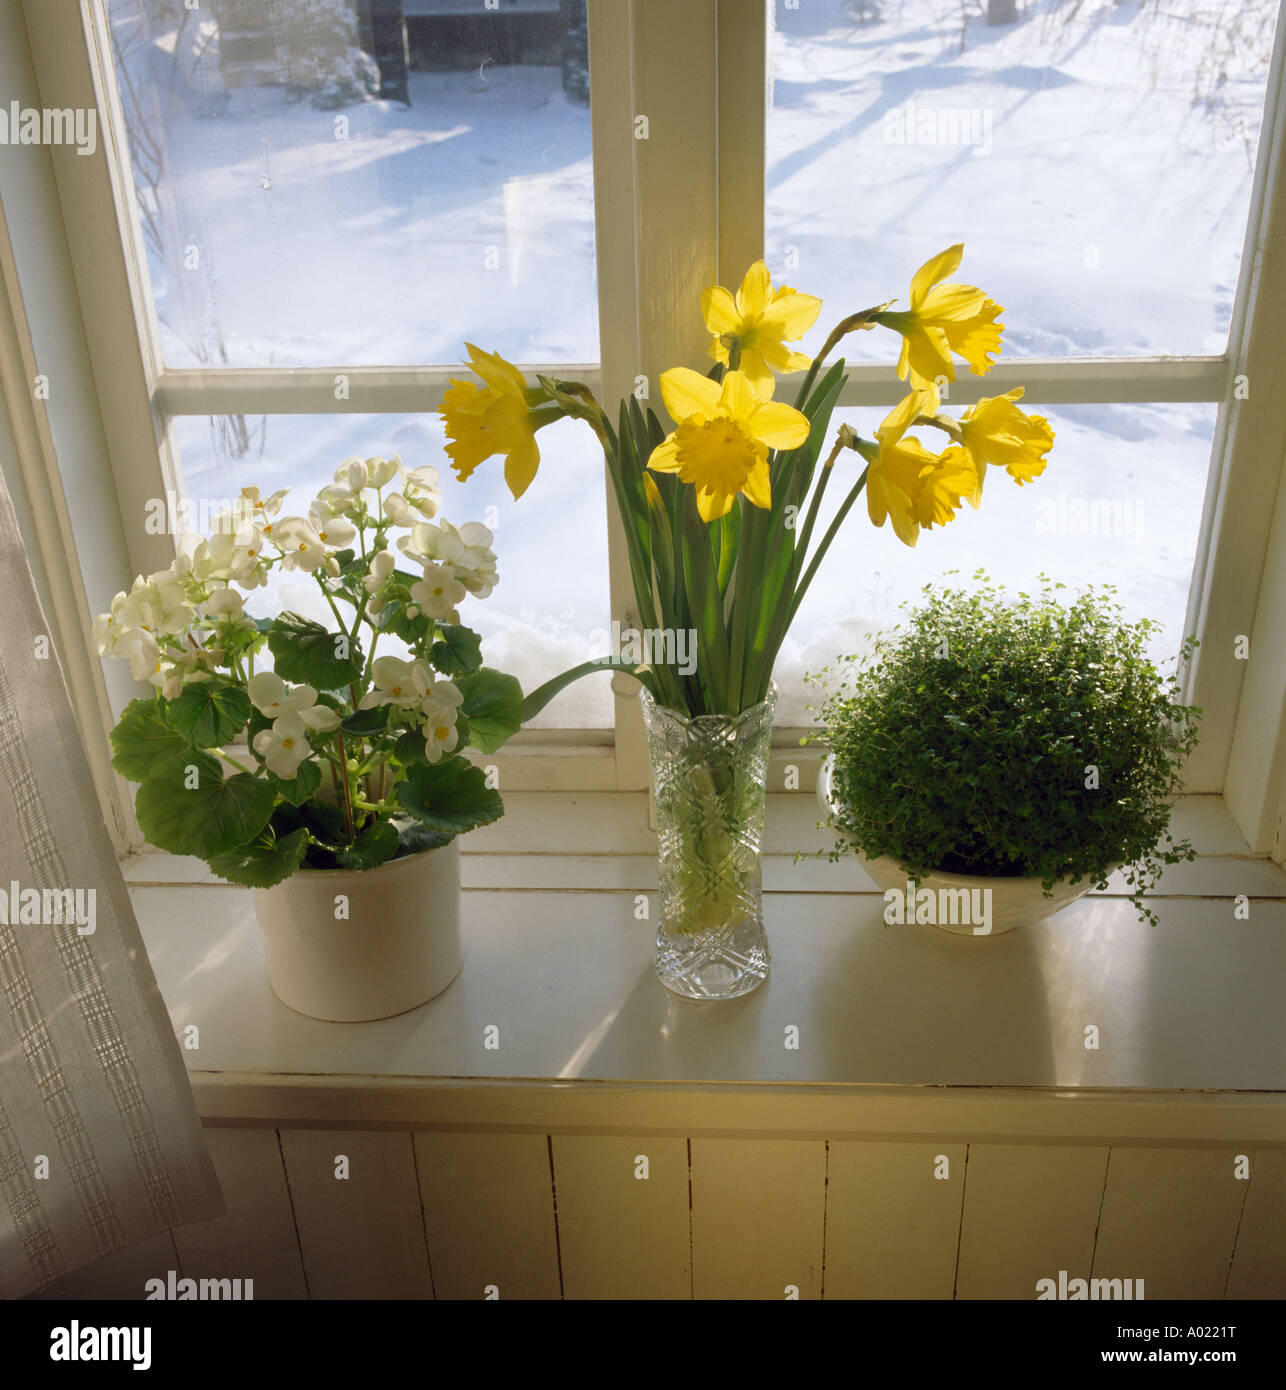 Close-up of white begonia and green helxine in pots on windowsill with vase of yellow daffodils Stock Photo